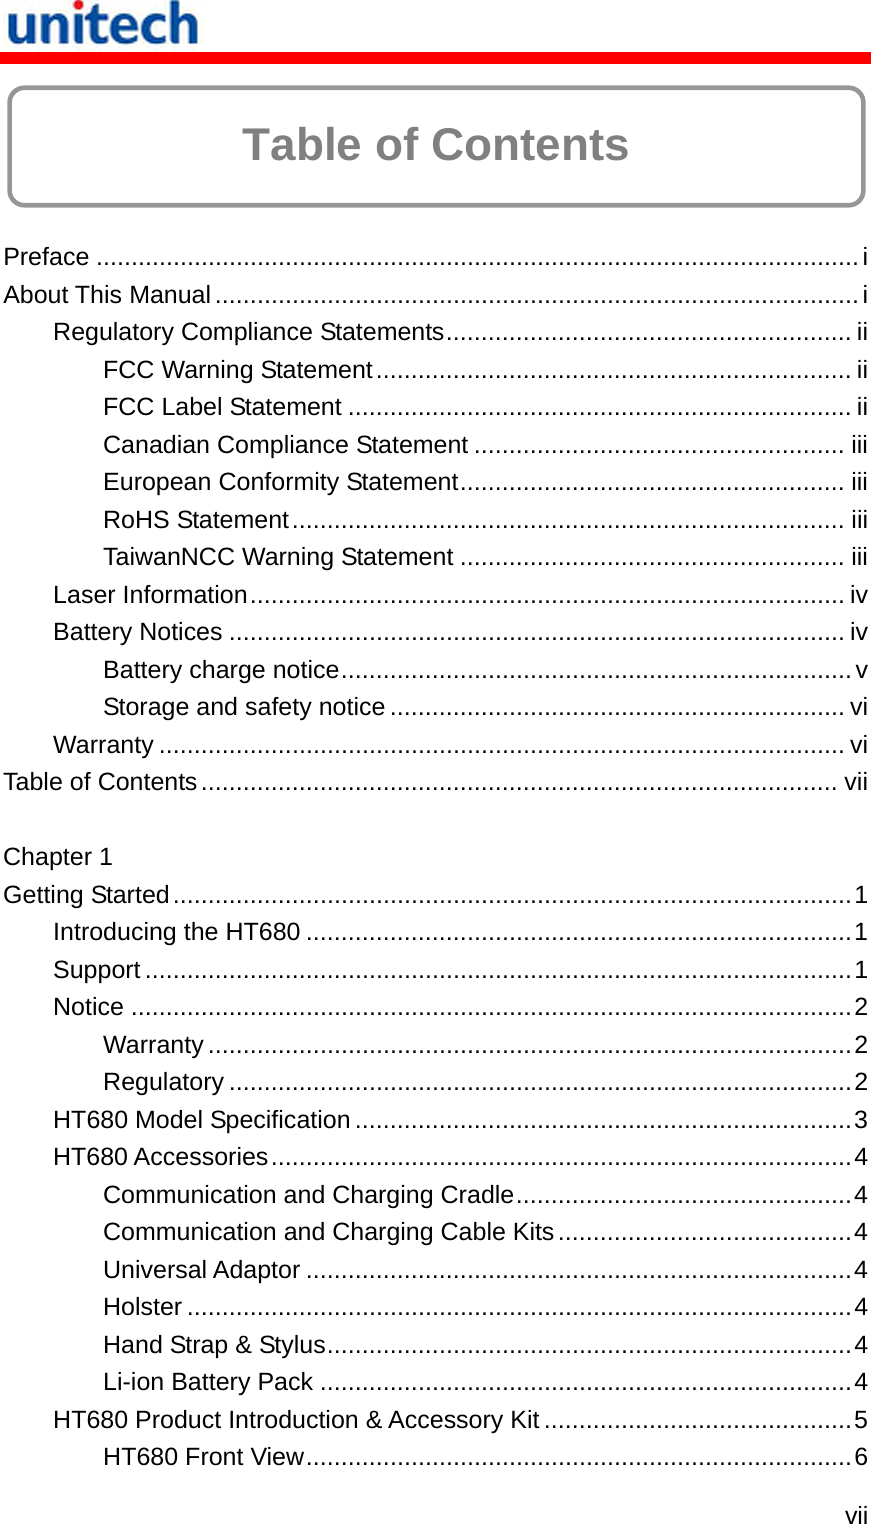   vii  Table of Contents  Preface .............................................................................................................i About This Manual............................................................................................i Regulatory Compliance Statements.......................................................... ii FCC Warning Statement.................................................................... ii FCC Label Statement ........................................................................ ii Canadian Compliance Statement ..................................................... iii European Conformity Statement....................................................... iii RoHS Statement............................................................................... iii TaiwanNCC Warning Statement ....................................................... iii Laser Information..................................................................................... iv Battery Notices ........................................................................................ iv Battery charge notice.........................................................................v Storage and safety notice ................................................................. vi Warranty .................................................................................................. vi Table of Contents........................................................................................... vii  Chapter 1 Getting Started.................................................................................................1 Introducing the HT680 ..............................................................................1 Support .....................................................................................................1 Notice .......................................................................................................2 Warranty ............................................................................................2 Regulatory .........................................................................................2 HT680 Model Specification .......................................................................3 HT680 Accessories...................................................................................4 Communication and Charging Cradle................................................4 Communication and Charging Cable Kits..........................................4 Universal Adaptor ..............................................................................4 Holster ...............................................................................................4 Hand Strap &amp; Stylus...........................................................................4 Li-ion Battery Pack ............................................................................4 HT680 Product Introduction &amp; Accessory Kit ............................................5 HT680 Front View..............................................................................6 